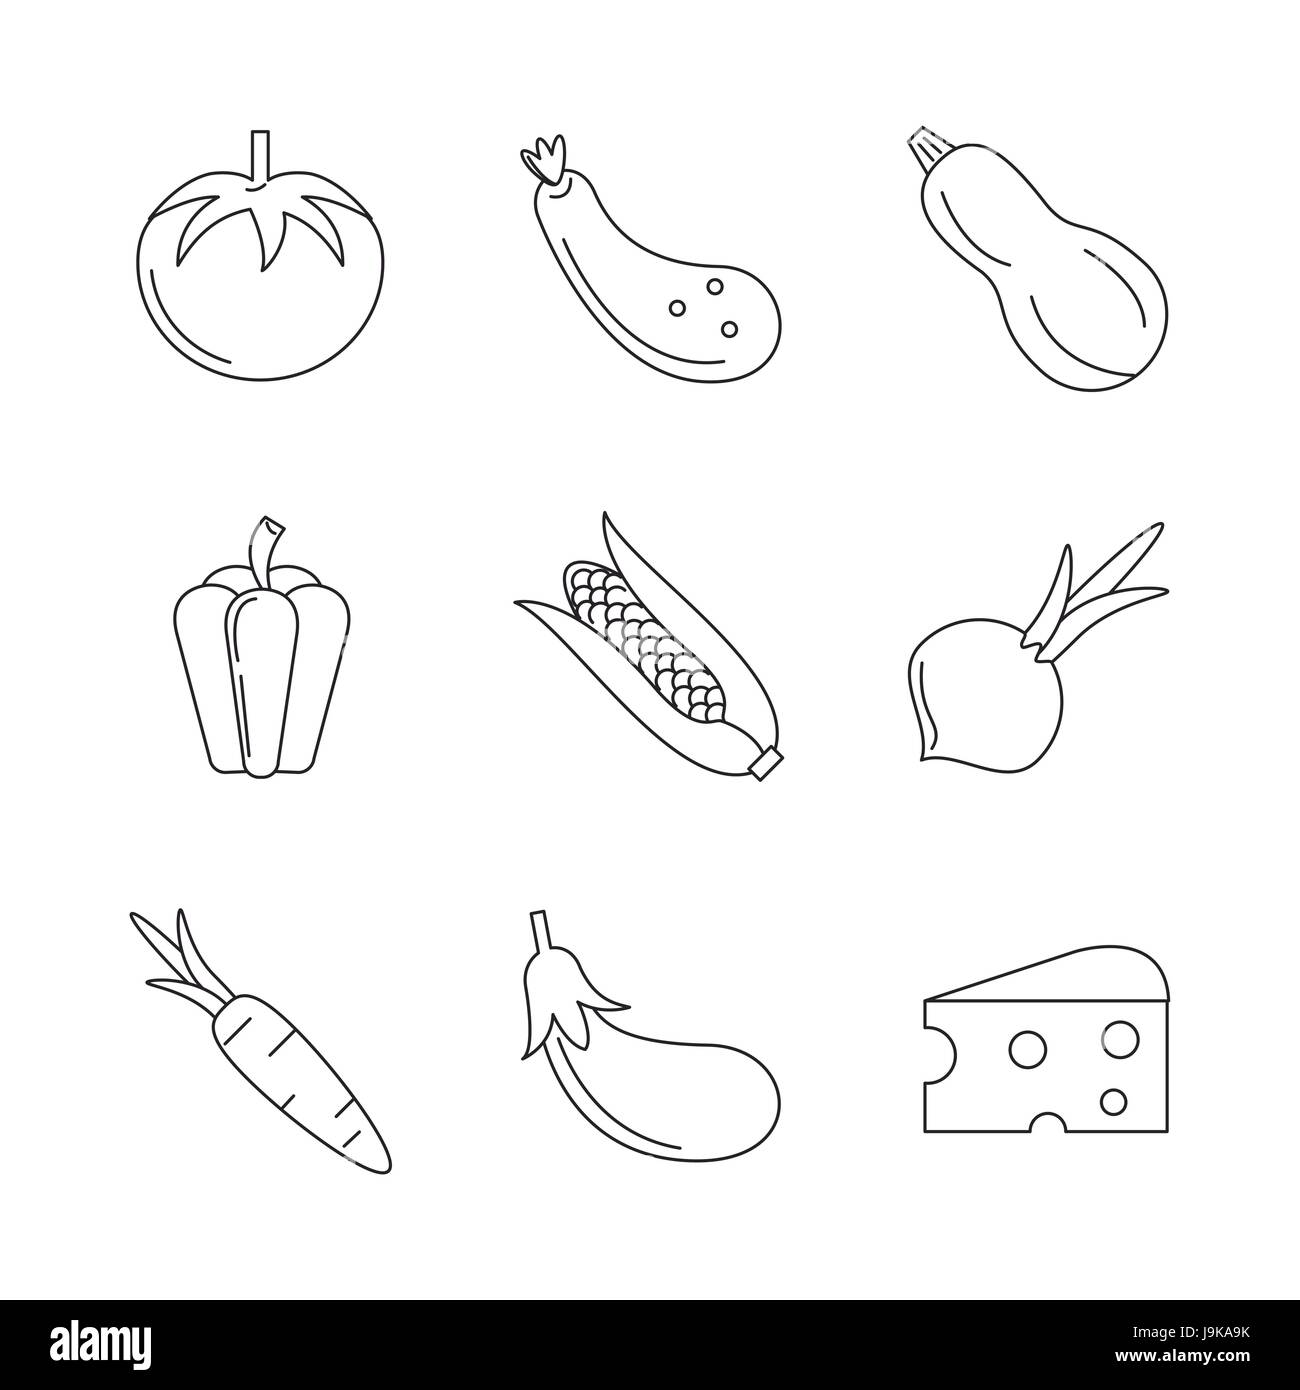 monochrome silhouette set of vegetables and cheese Stock Vector